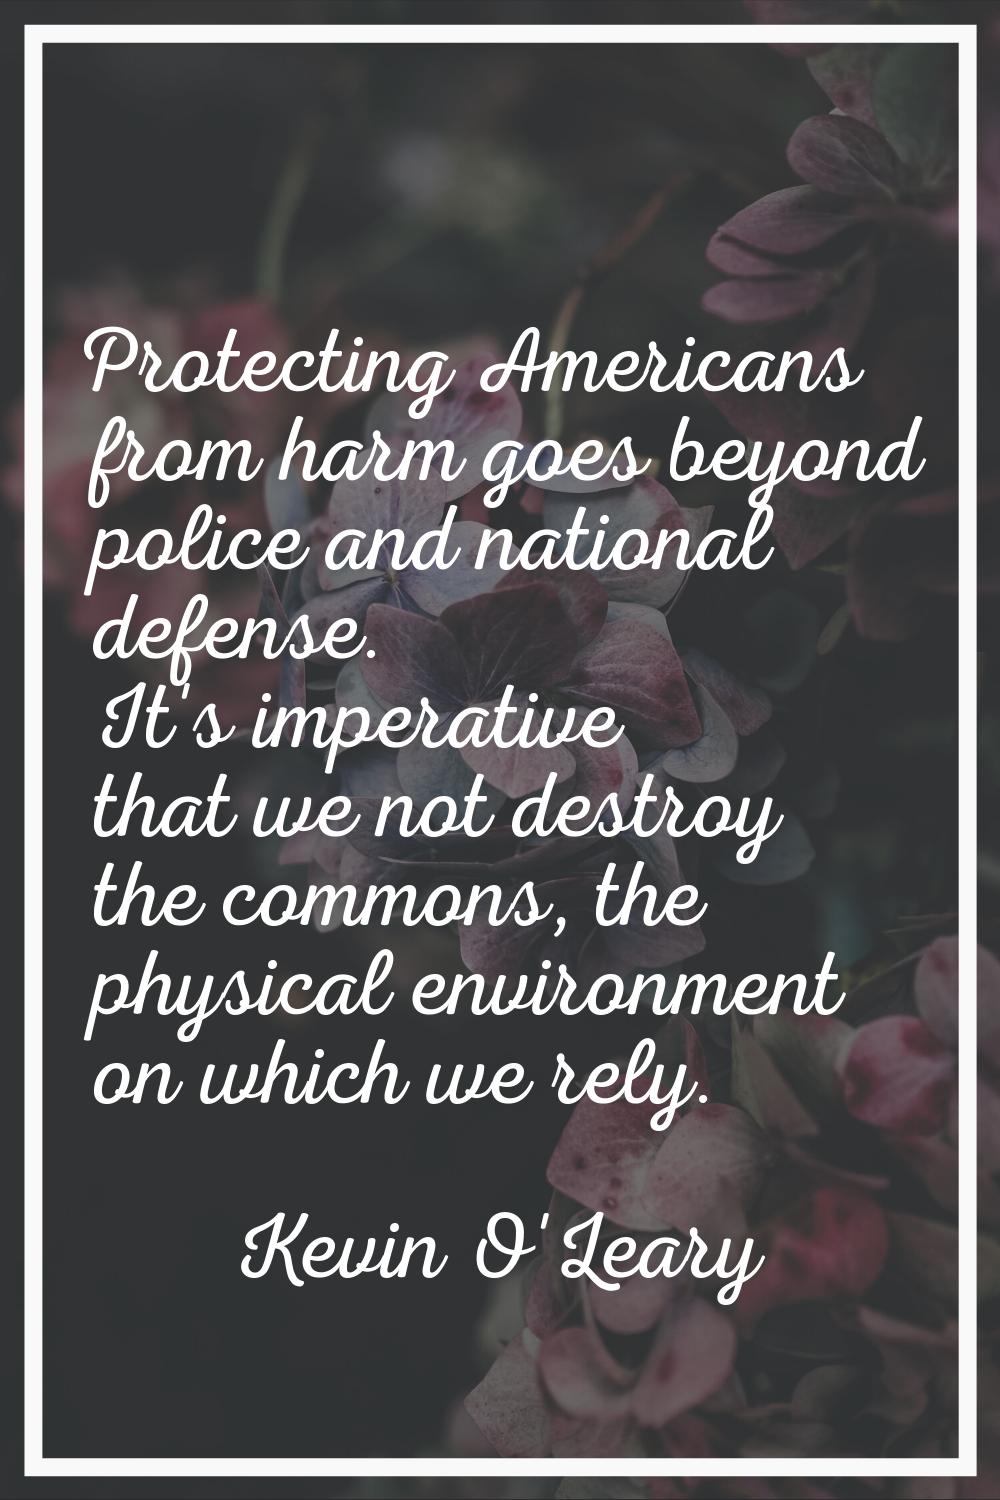 Protecting Americans from harm goes beyond police and national defense. It's imperative that we not